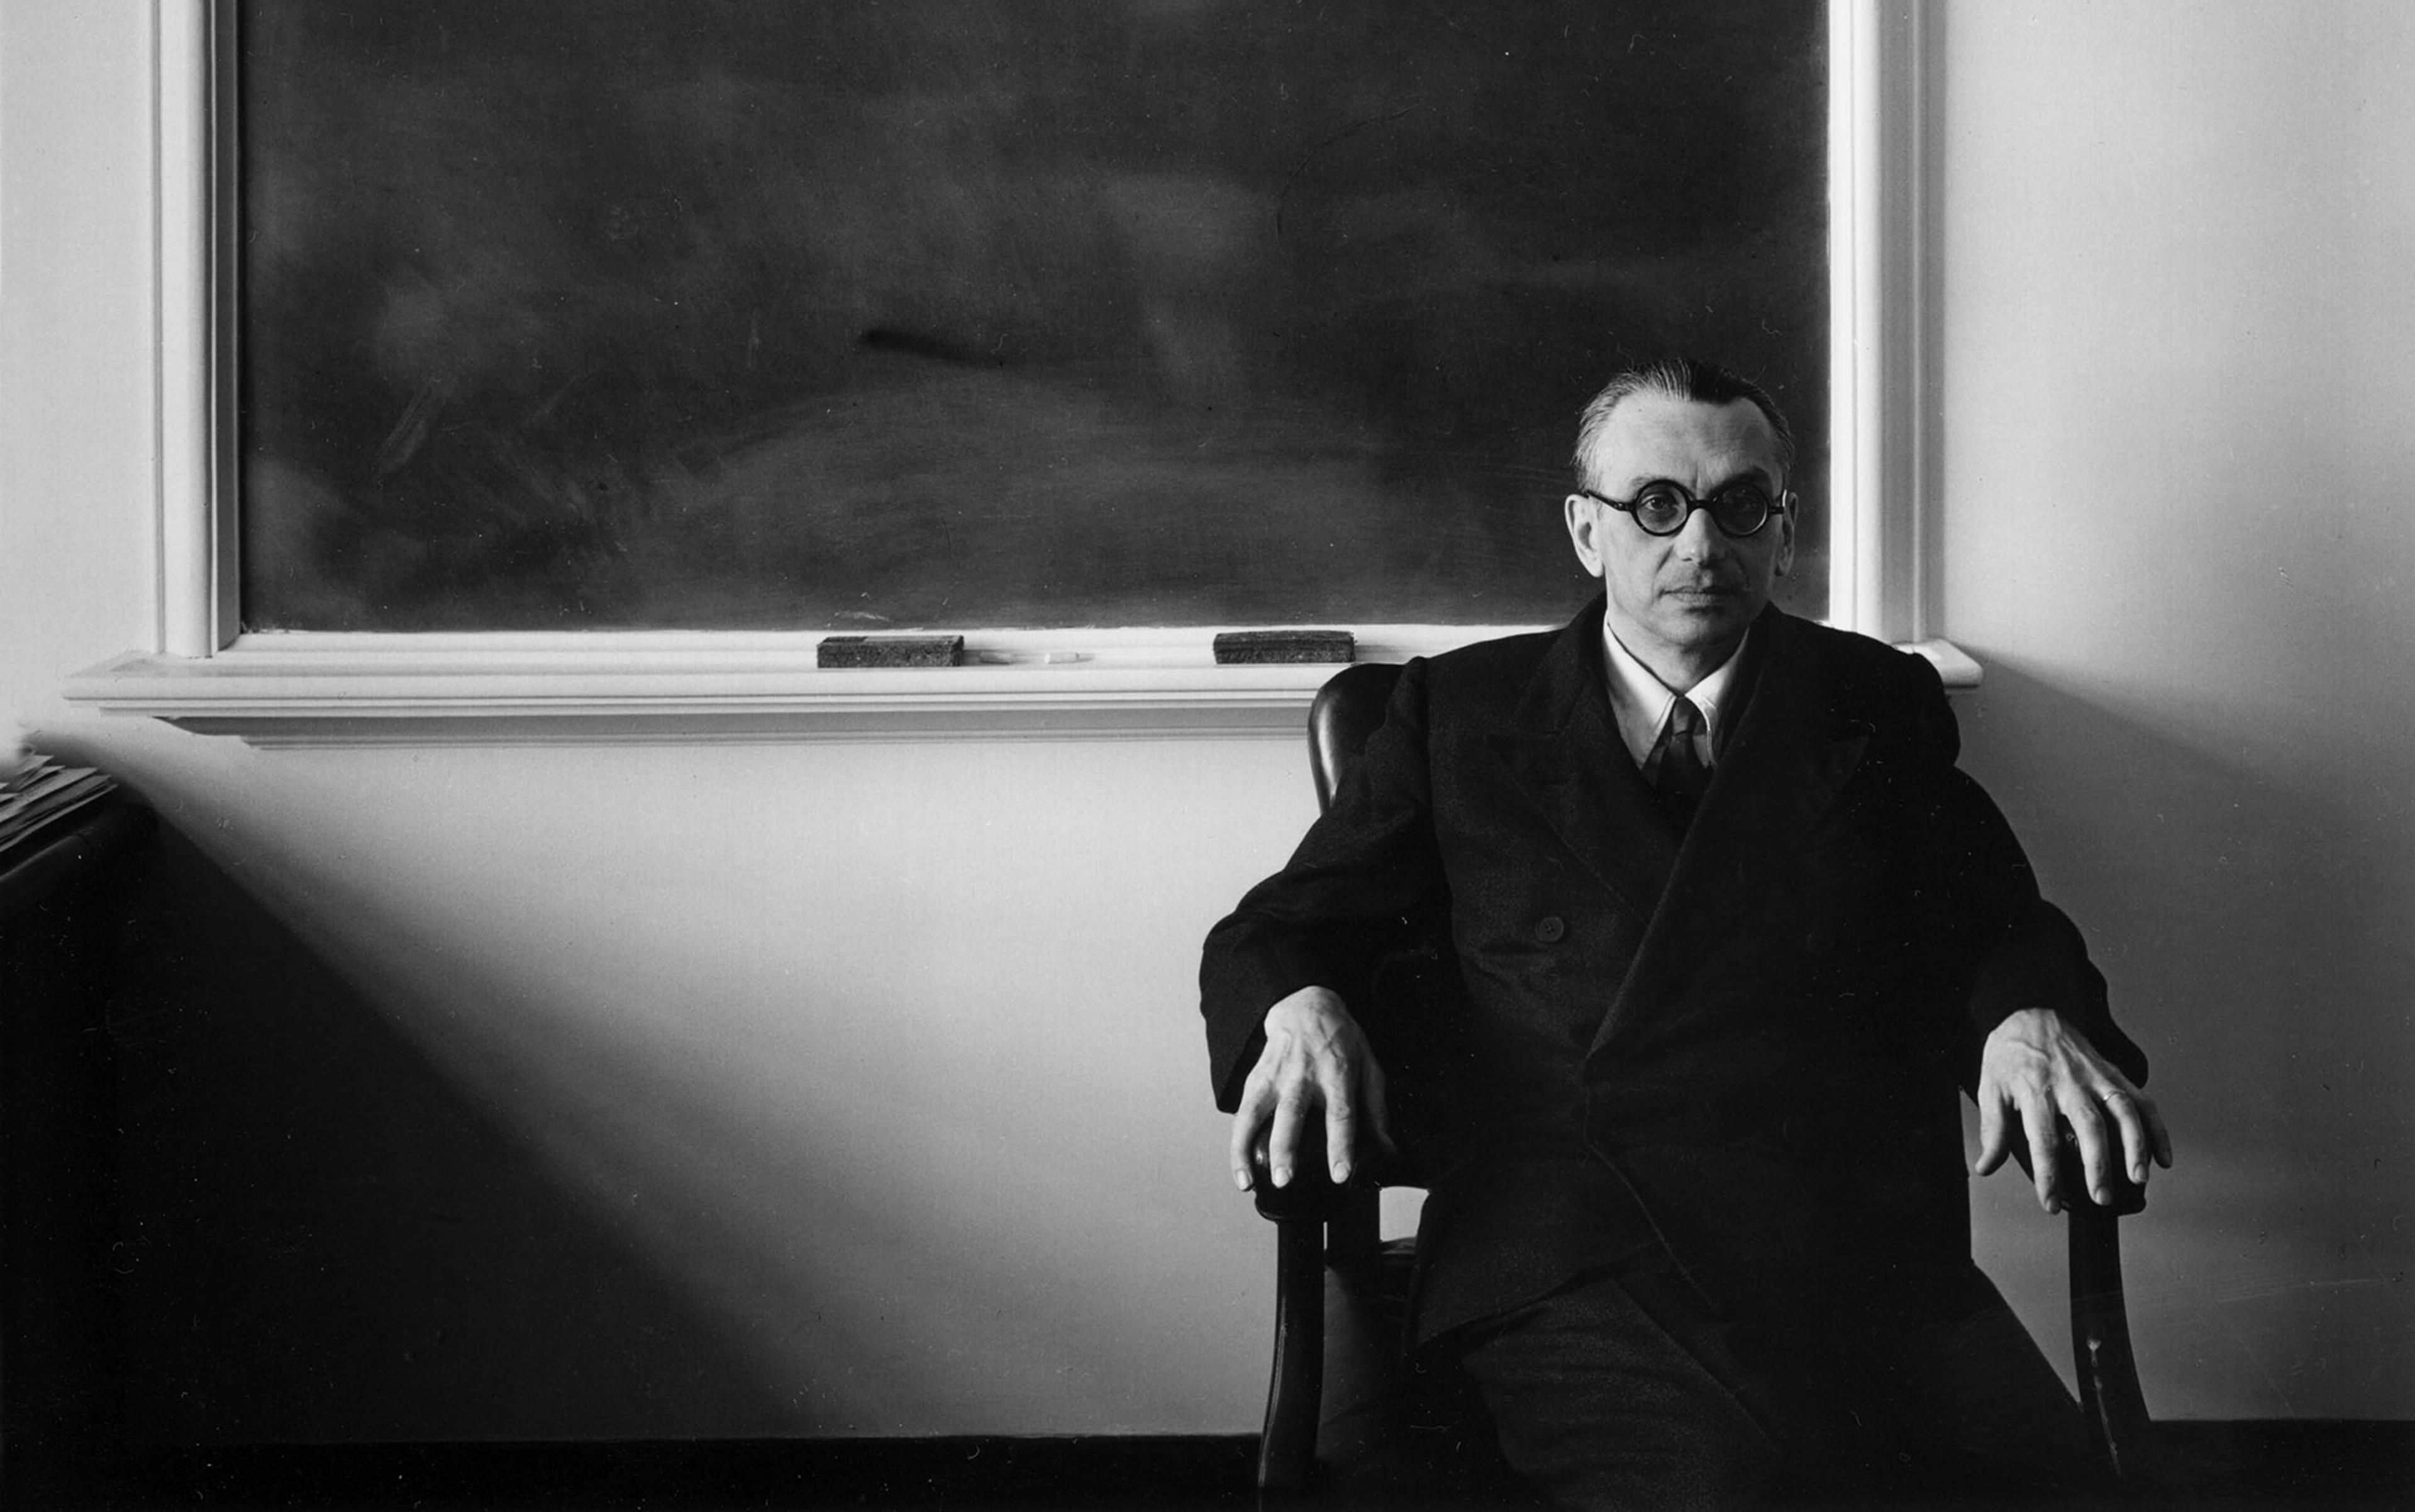 Black-and white photo of a man wearing glasses and a suit sitting in a chair in front of a blackboard in a classroom.